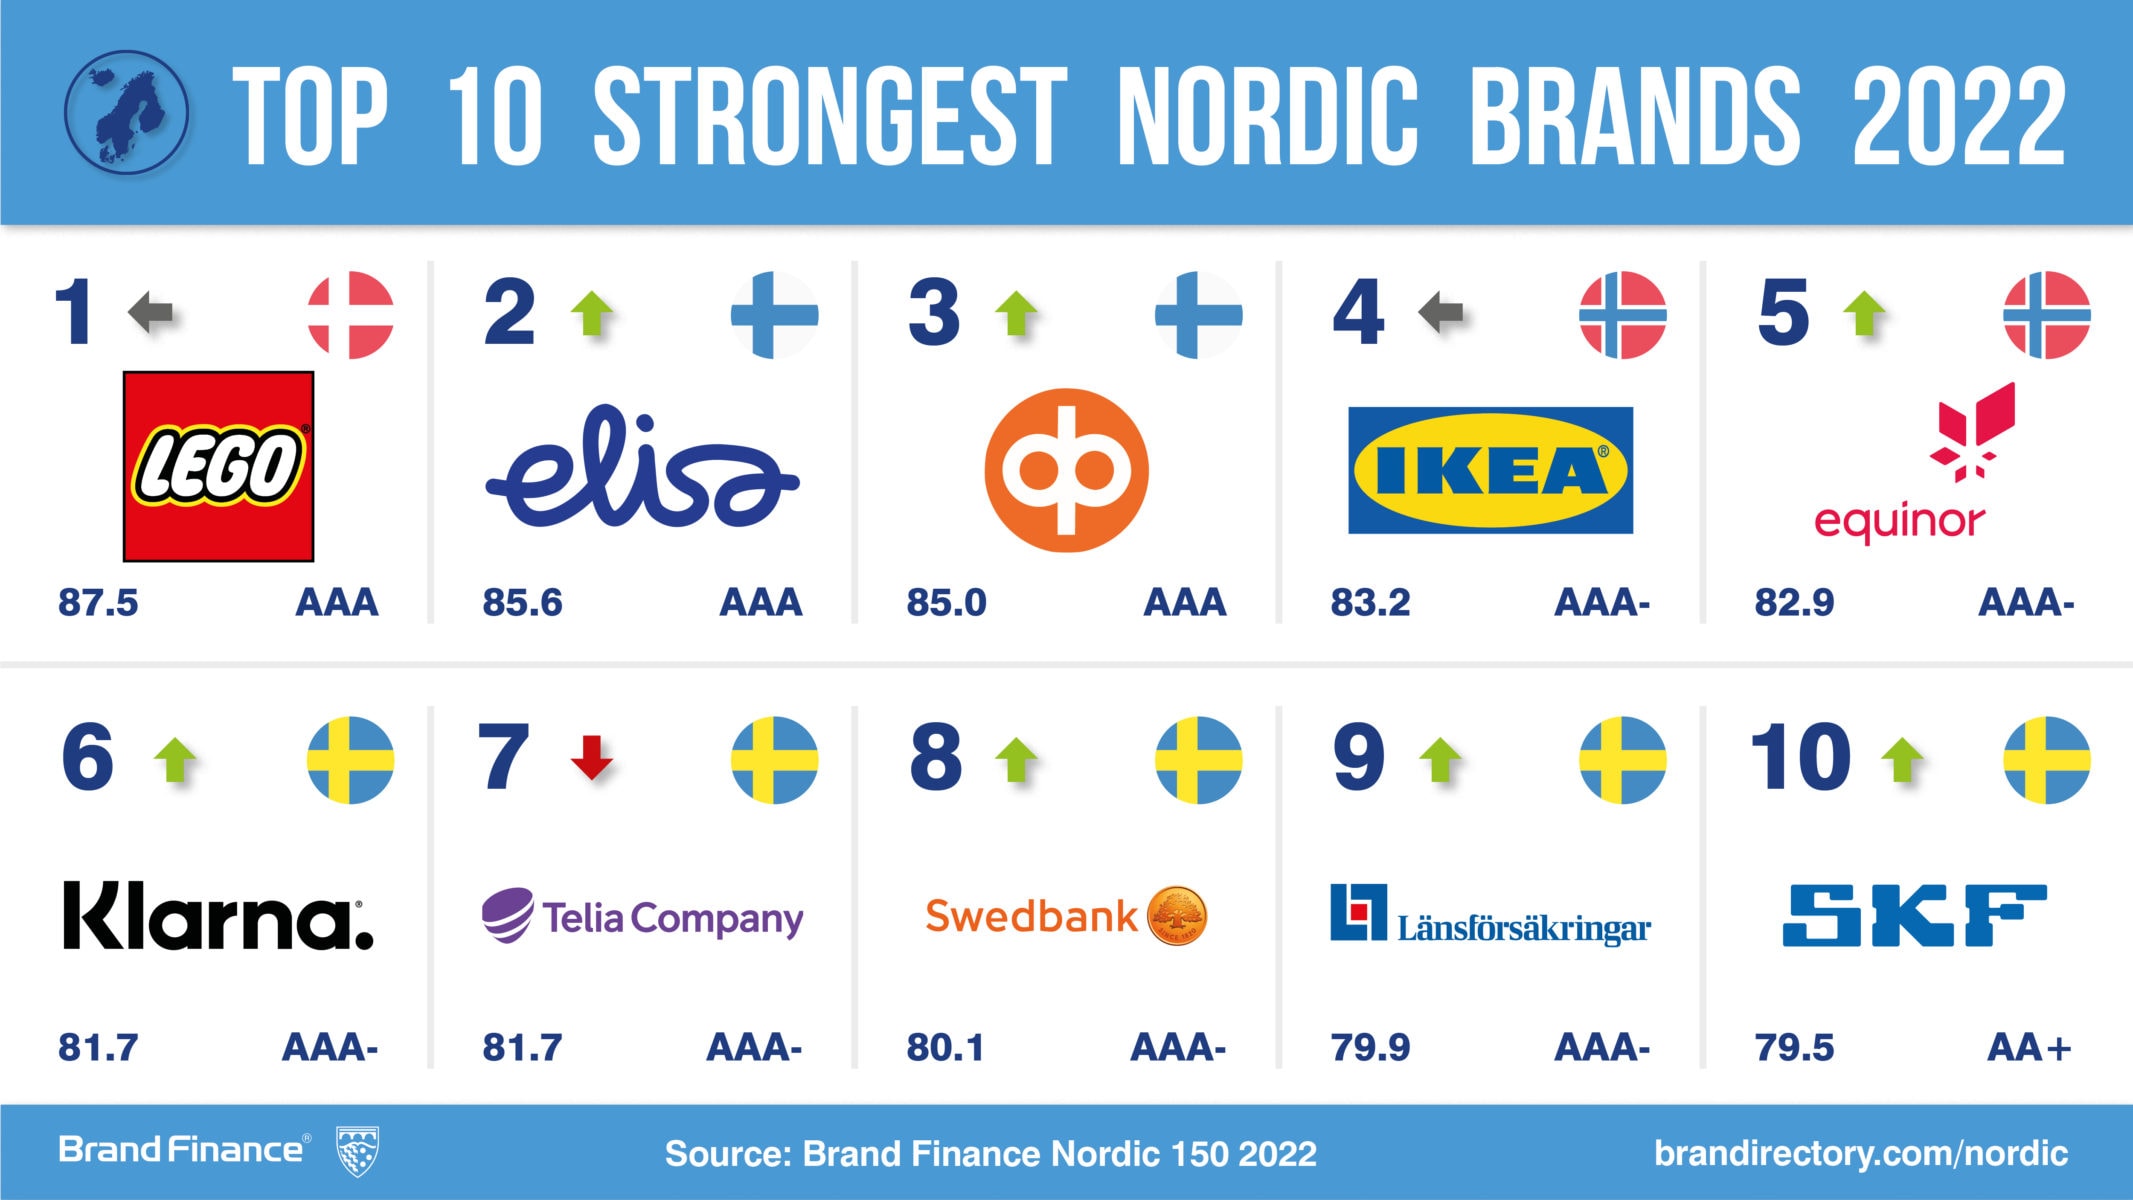 IKEA is unbeatable with decade long reign as the top Nordic brand ...